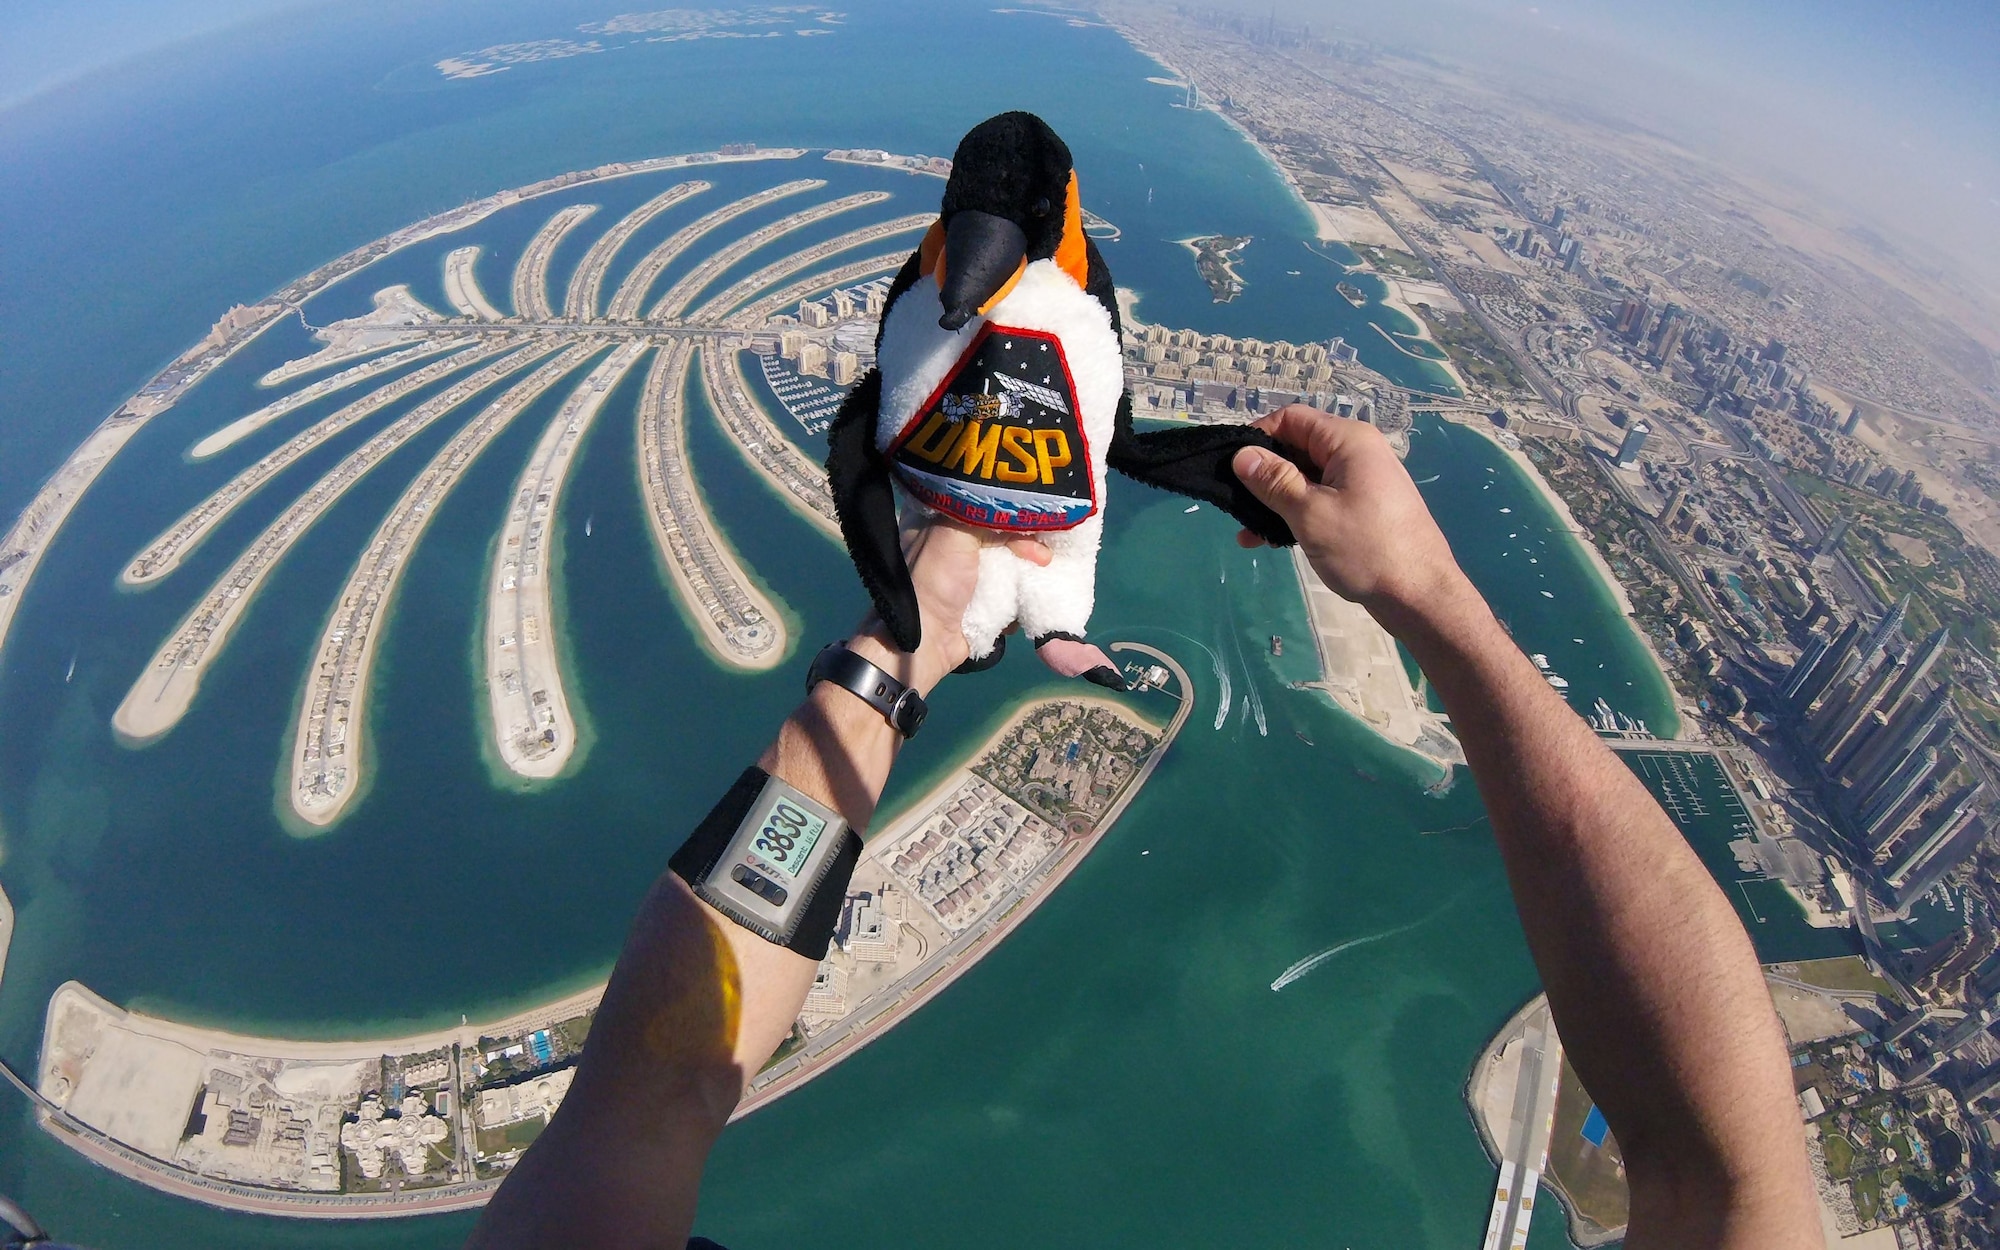 Maj. Matthew Shull, 6th Space Operations Squadron, takes the DMSP (Defense Meteorological Satellite Program) mascot for a flight during the 9th World Cup of Canopy Piloting event in Dubai, United Arab Emirates, Dec. 1, 2017.